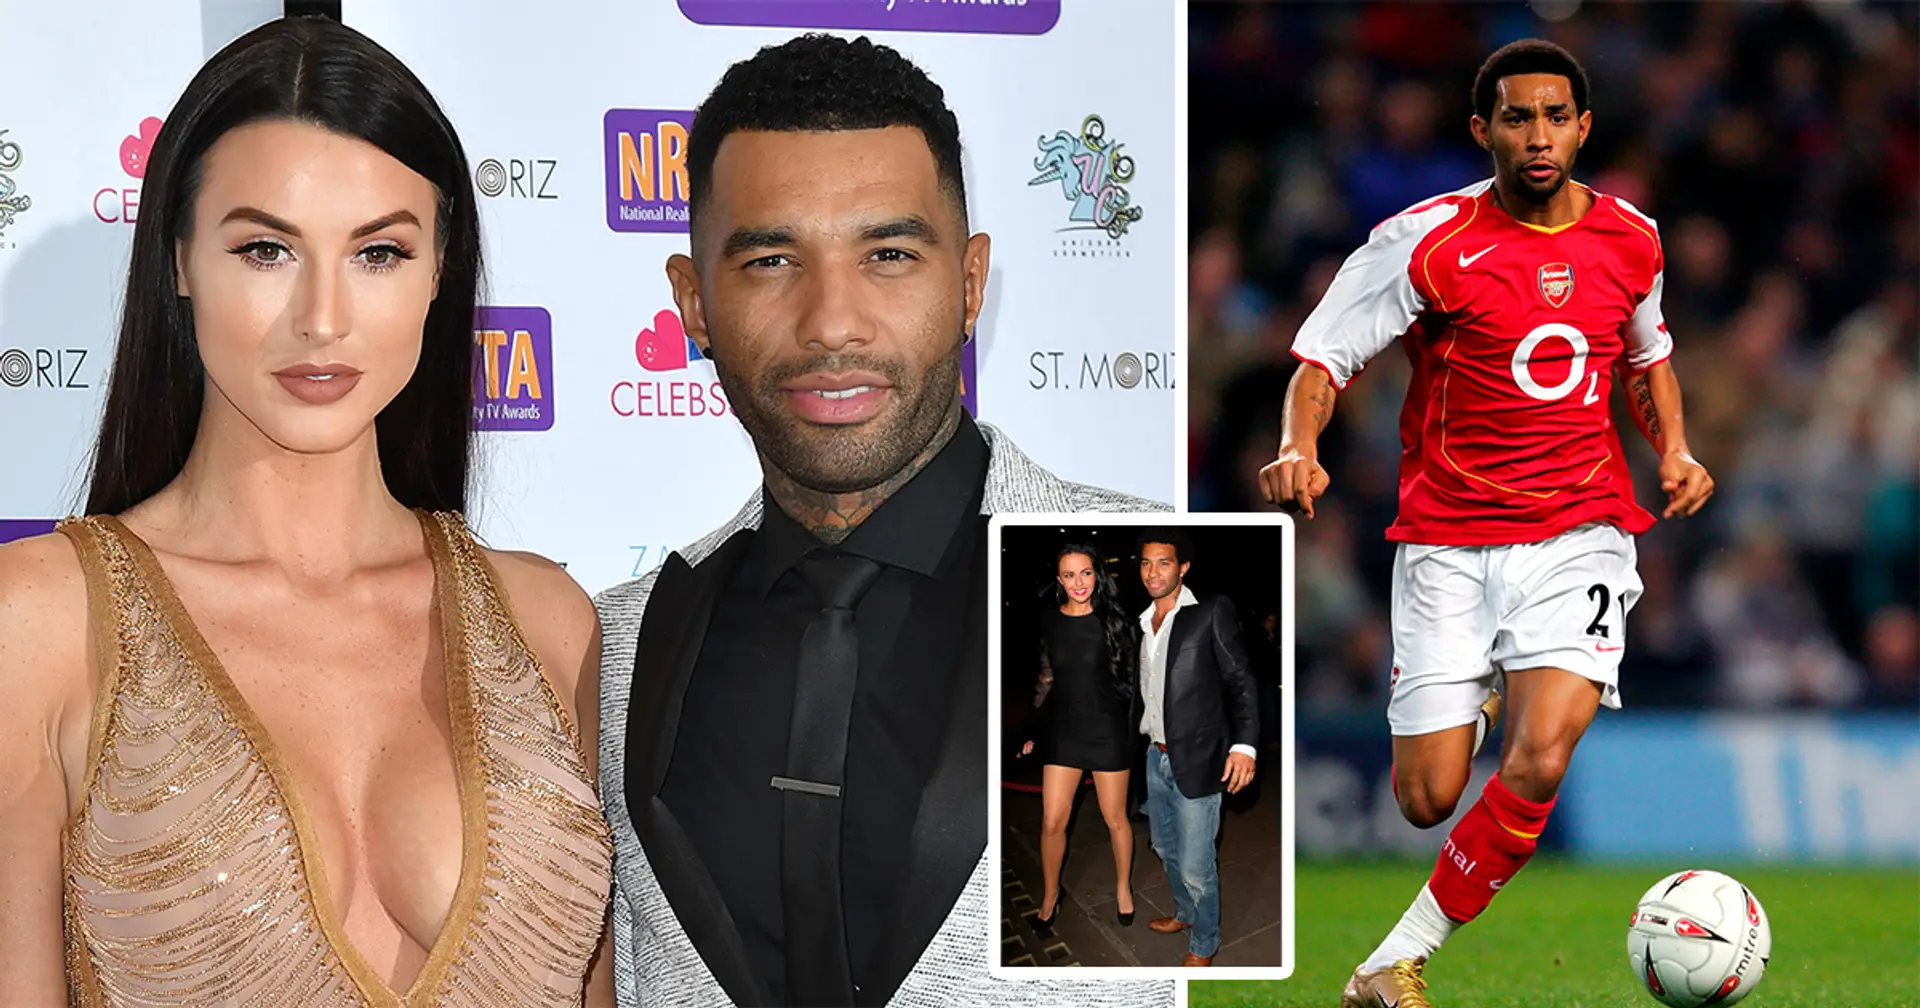 'This is the worst time. Not today, no': Jermaine Pennant recalls on scoring hat-trick despite partying until 3 am